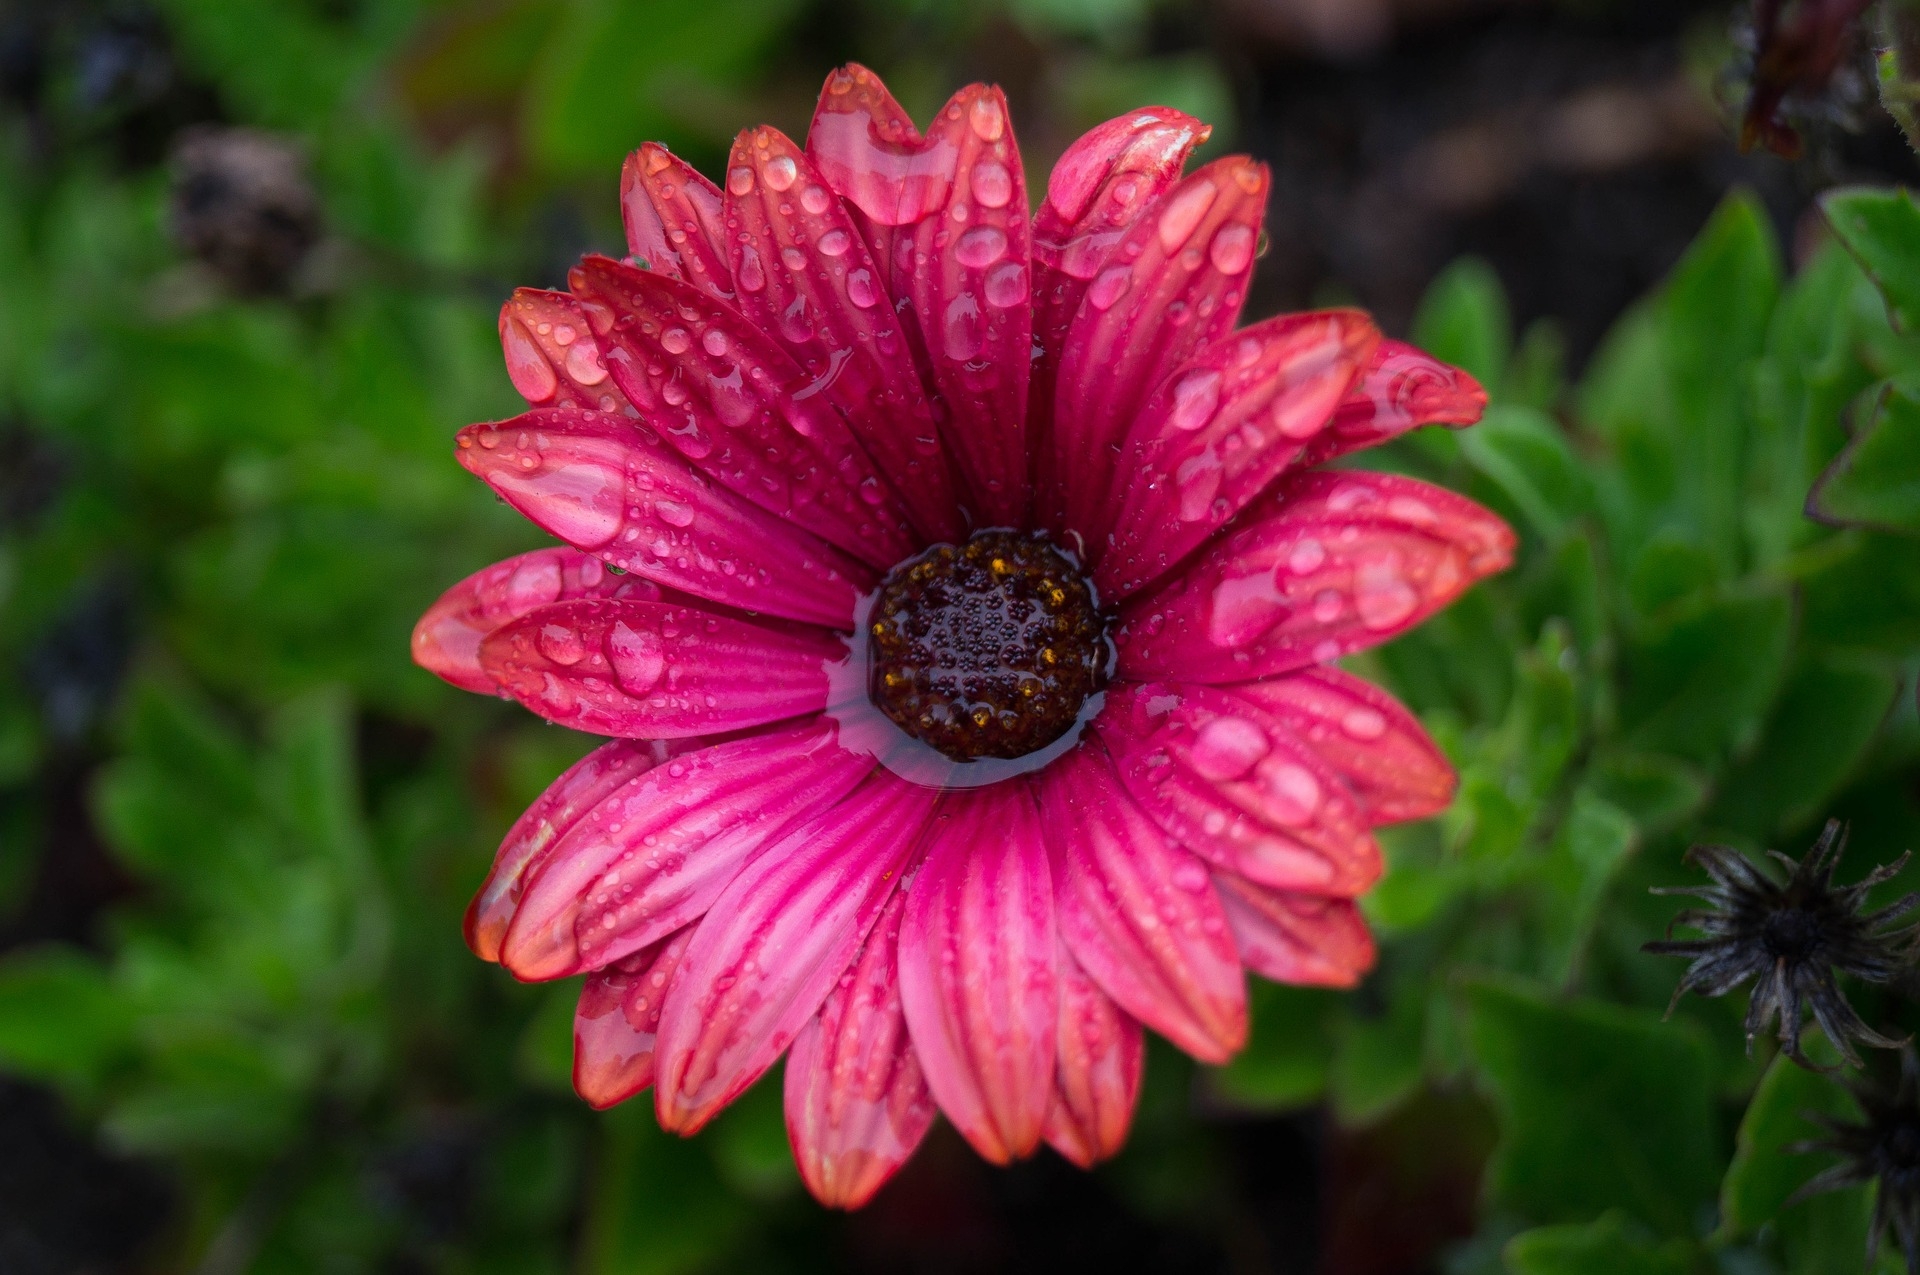 A pink flower in the rain